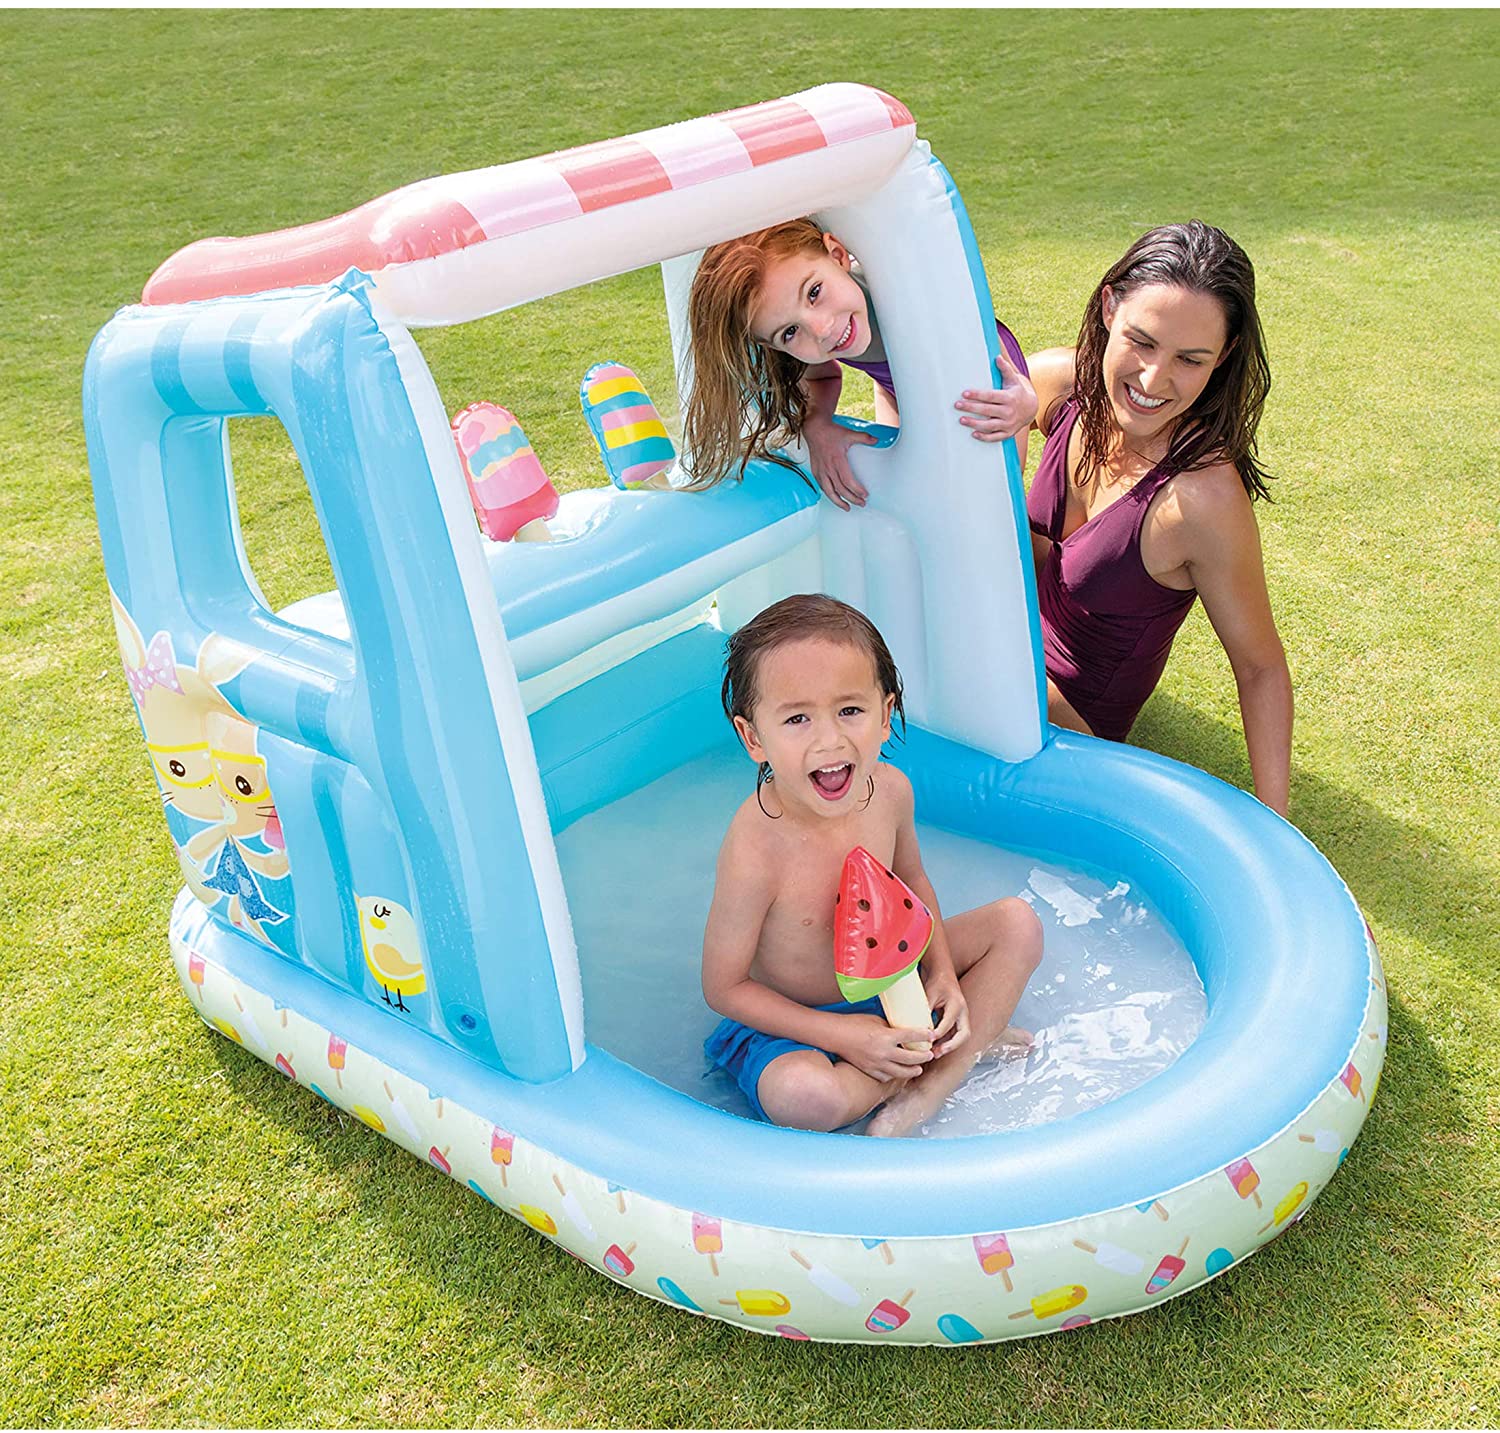 Intex Ice Cream Stand Play House And Pool 50"40"x39"